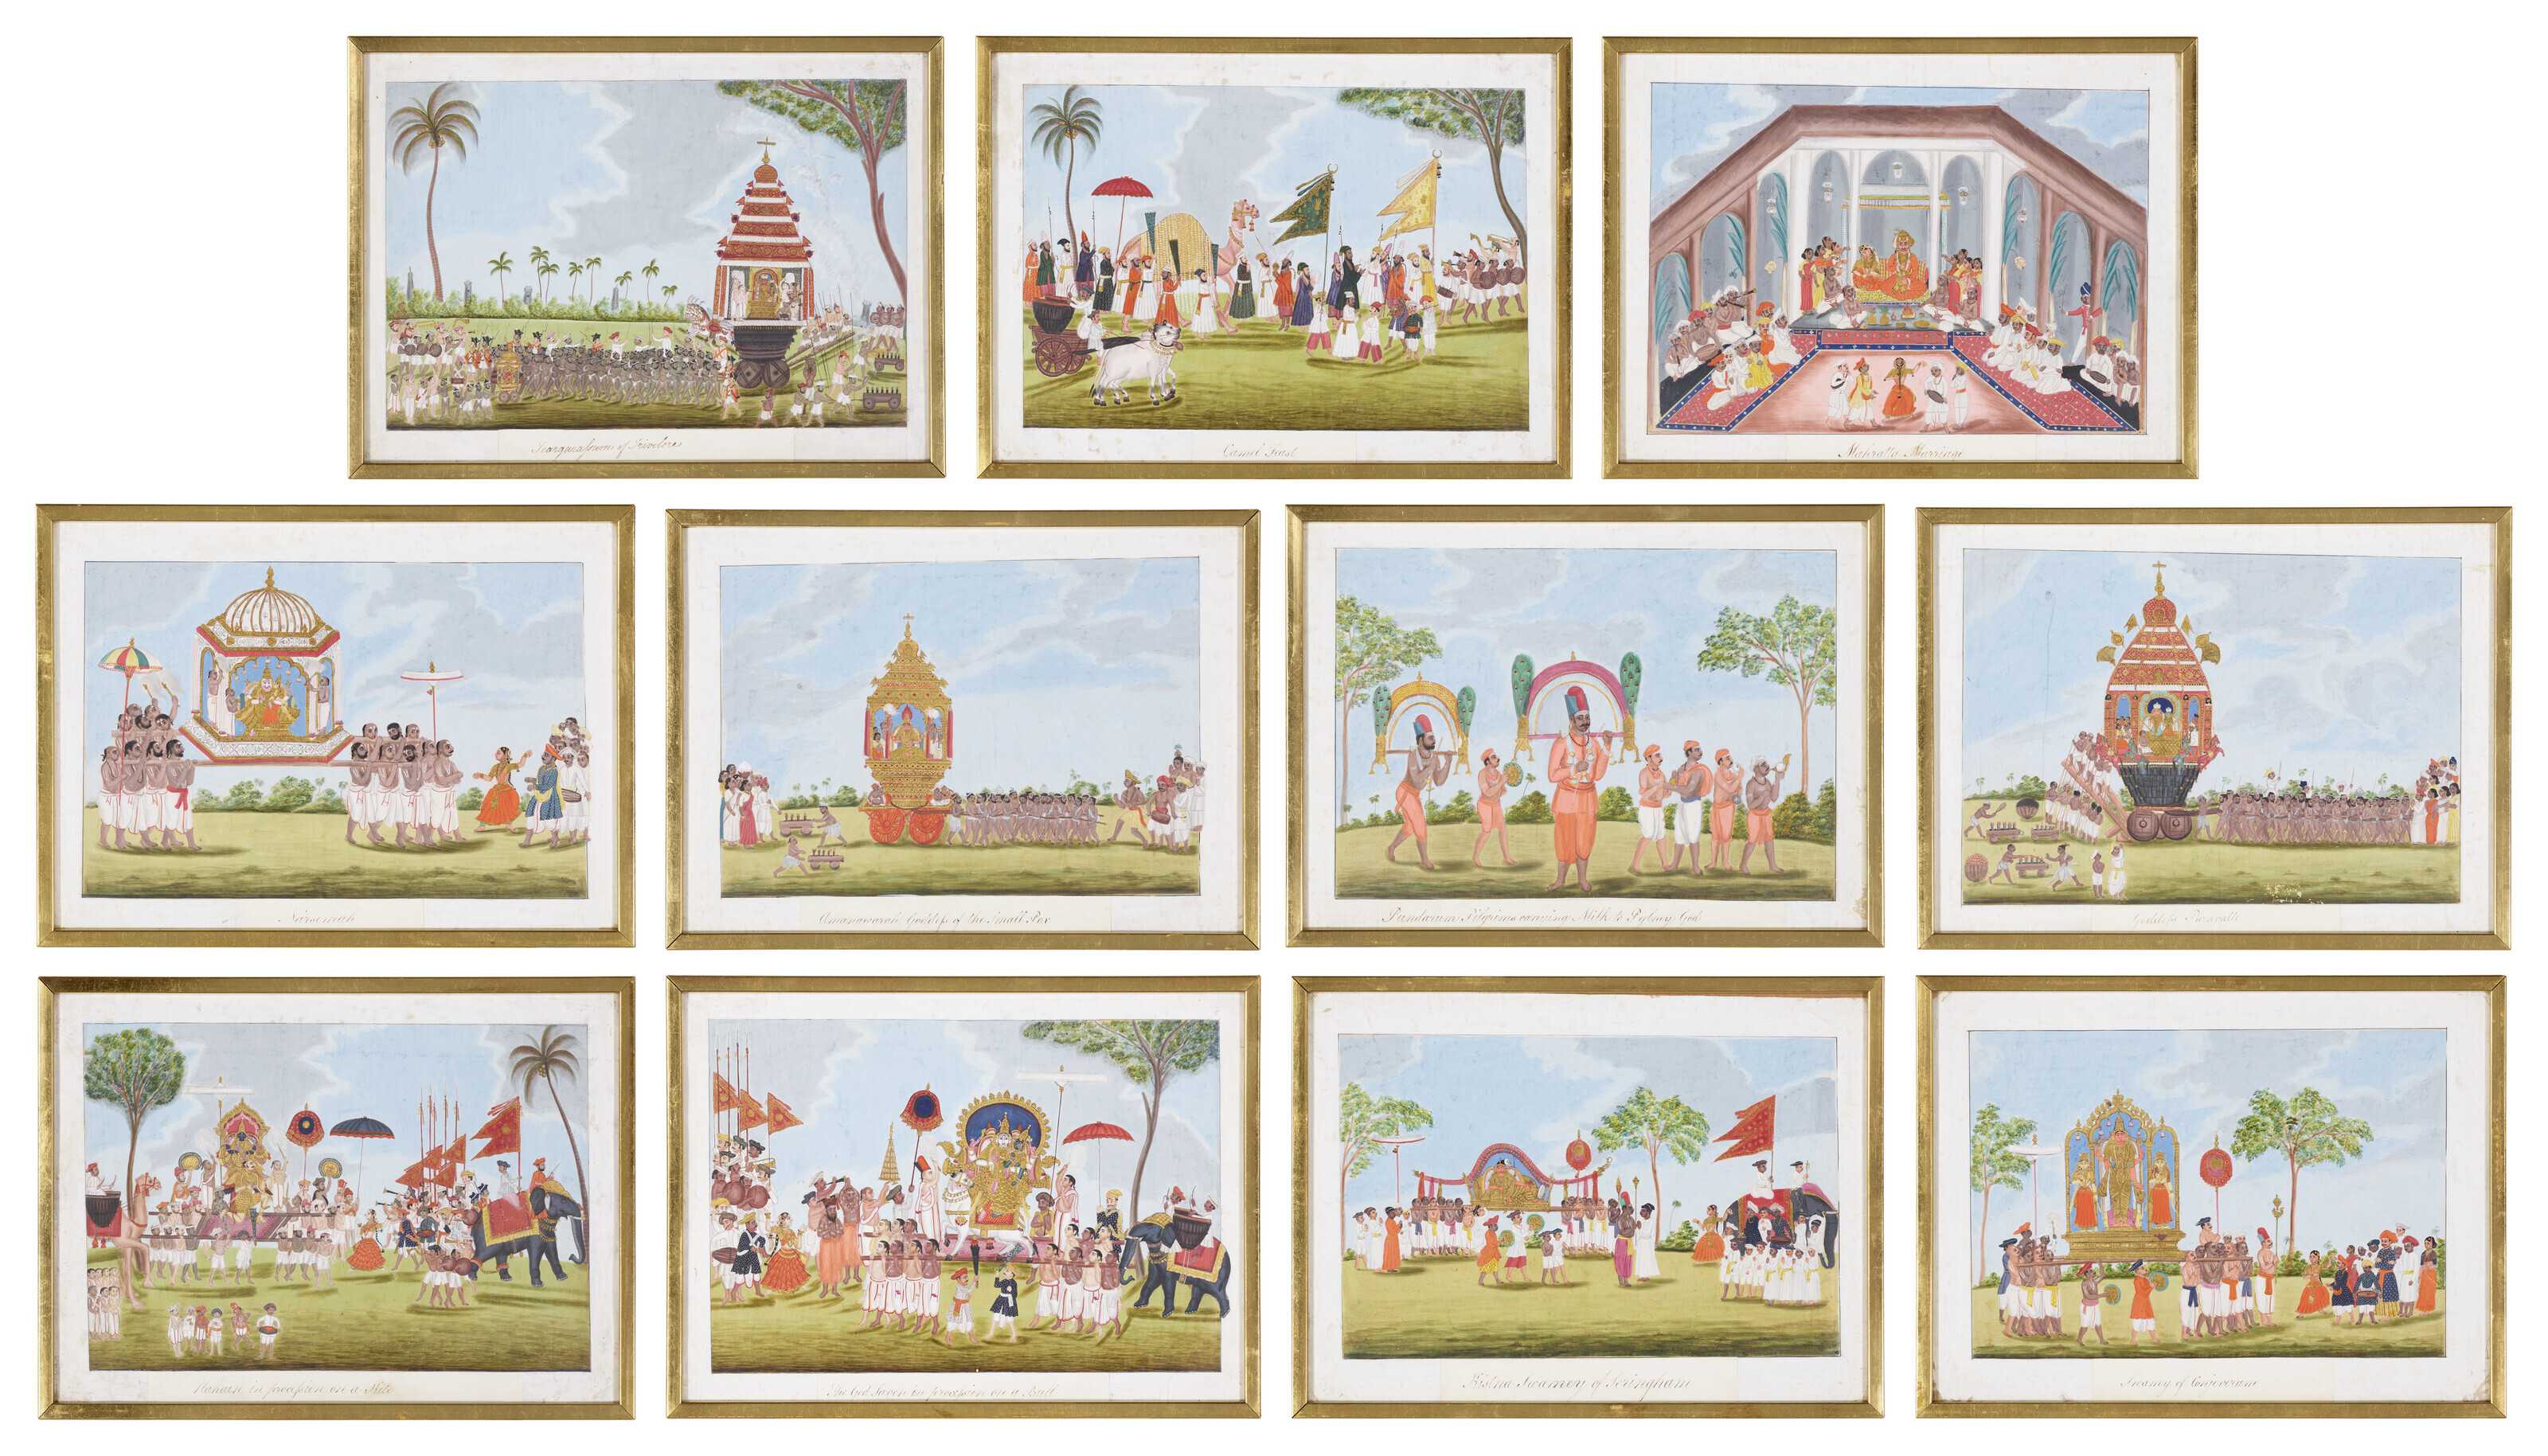 Set of 11 Company School watercolors depicting processions and festivities in southern India, which hammered for $60,000 and sold for $75,600 with buyer’s premium at Christie’s March 29.